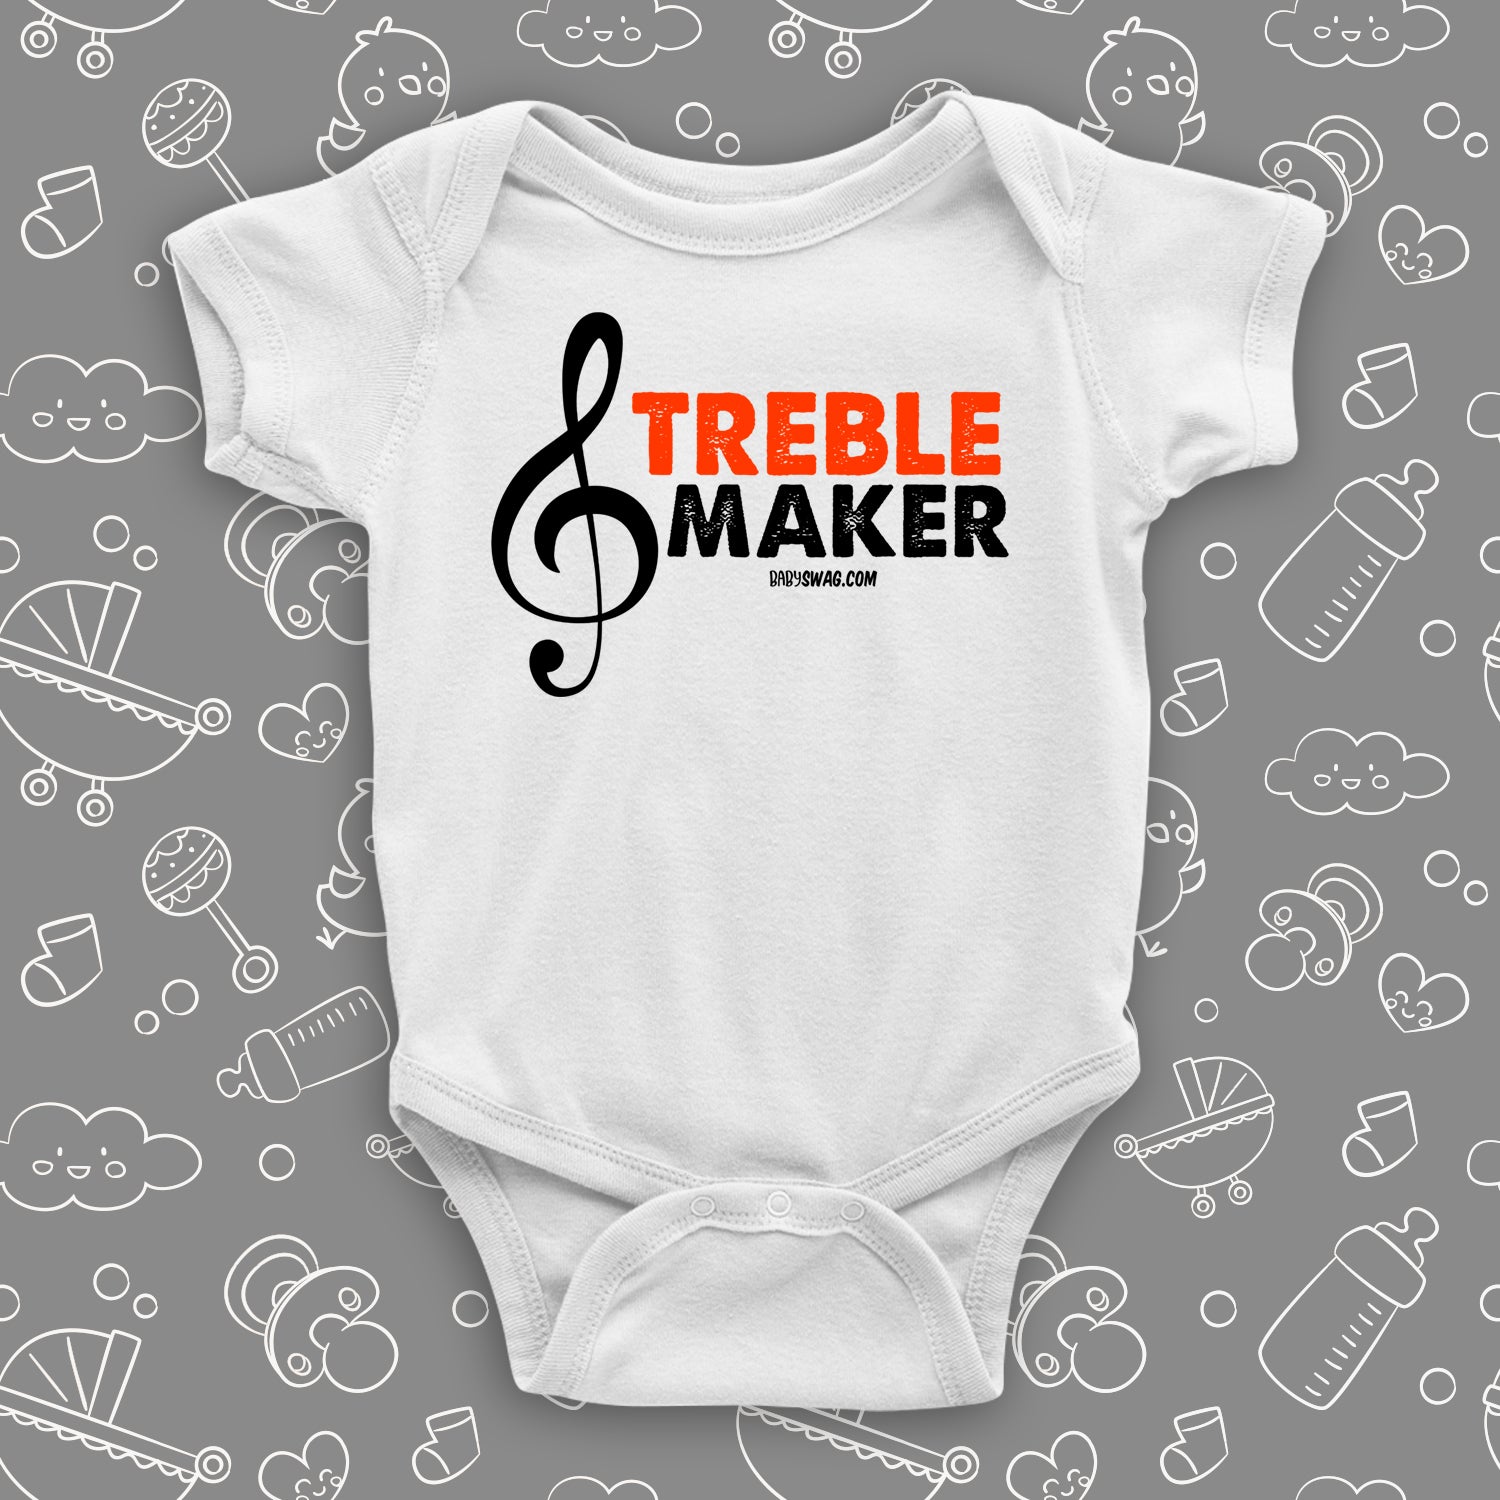 The "Treble Maker" cute baby onesies in white.